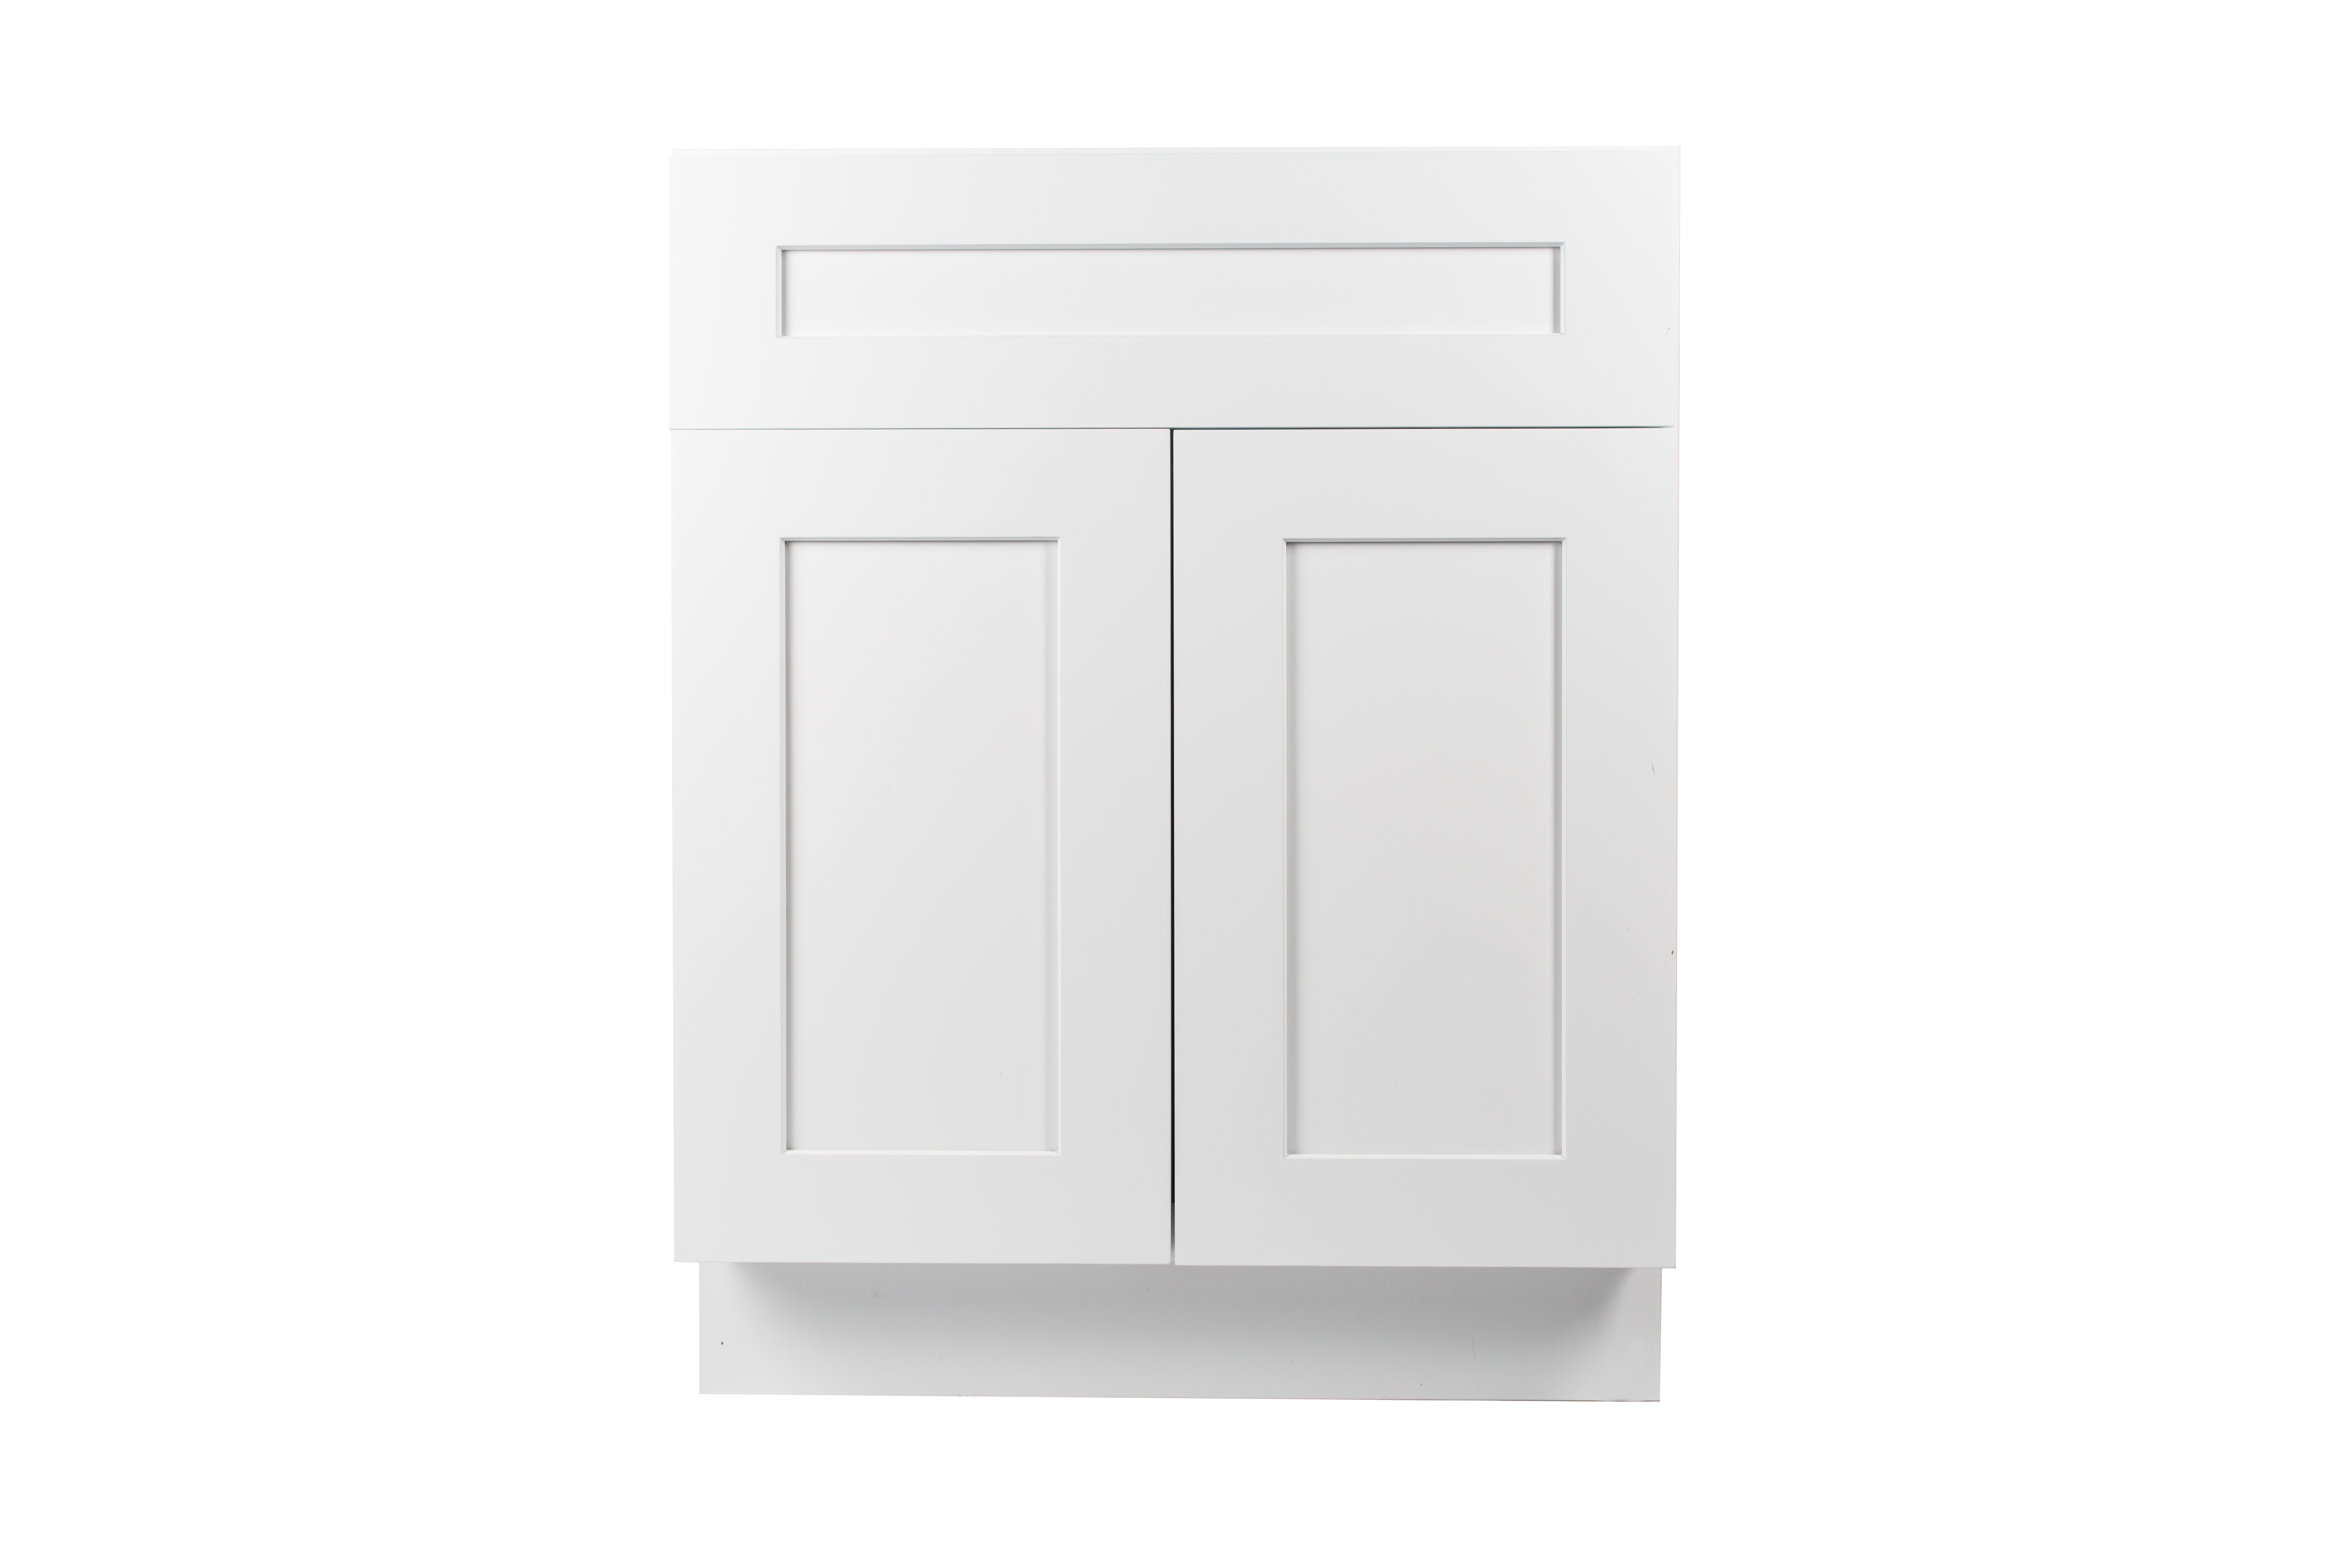 Ready to Assemble 24x34.5x24 in. Shaker Sink Base Cabinet with 2 Doors in White